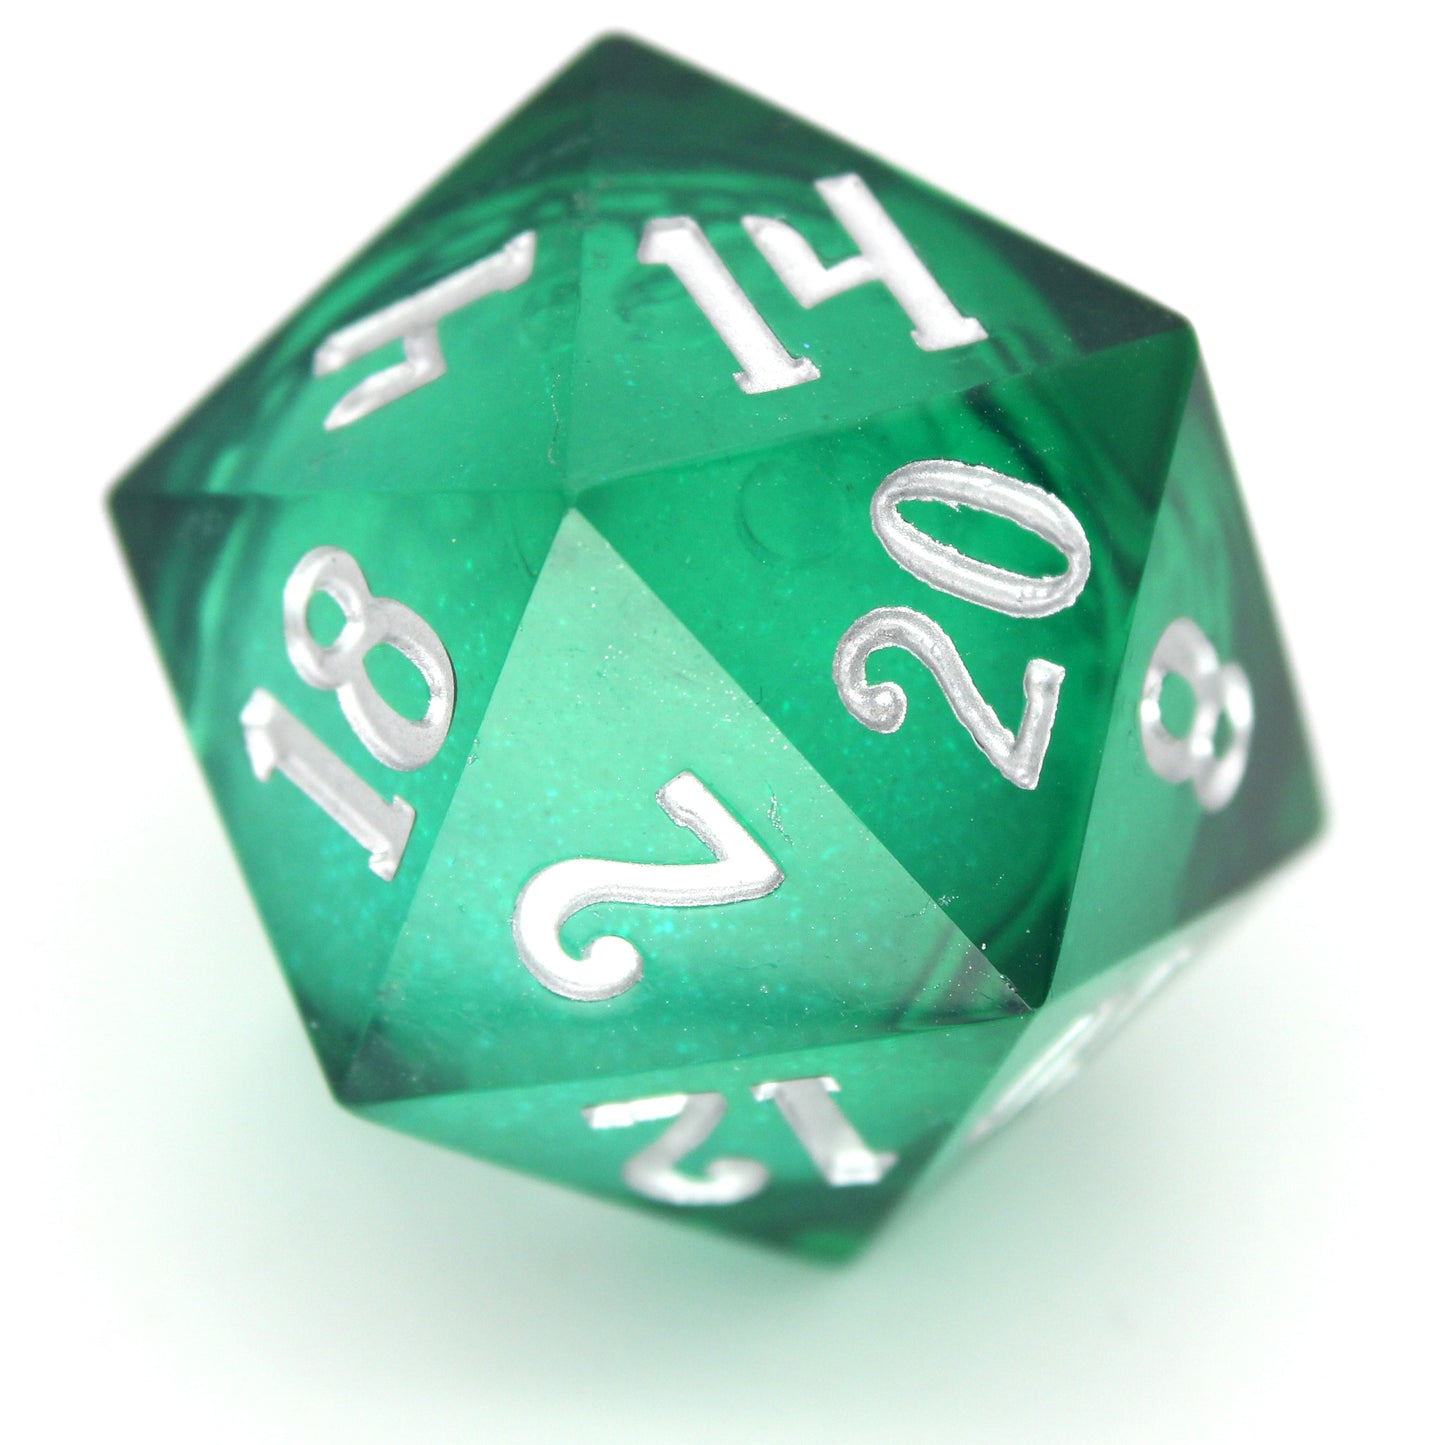 Siren Song is a 7-piece, translucent emerald-green, sharp edge resin dice set with a liquid core of color-shifting pearlescent glitter, inked in silver.